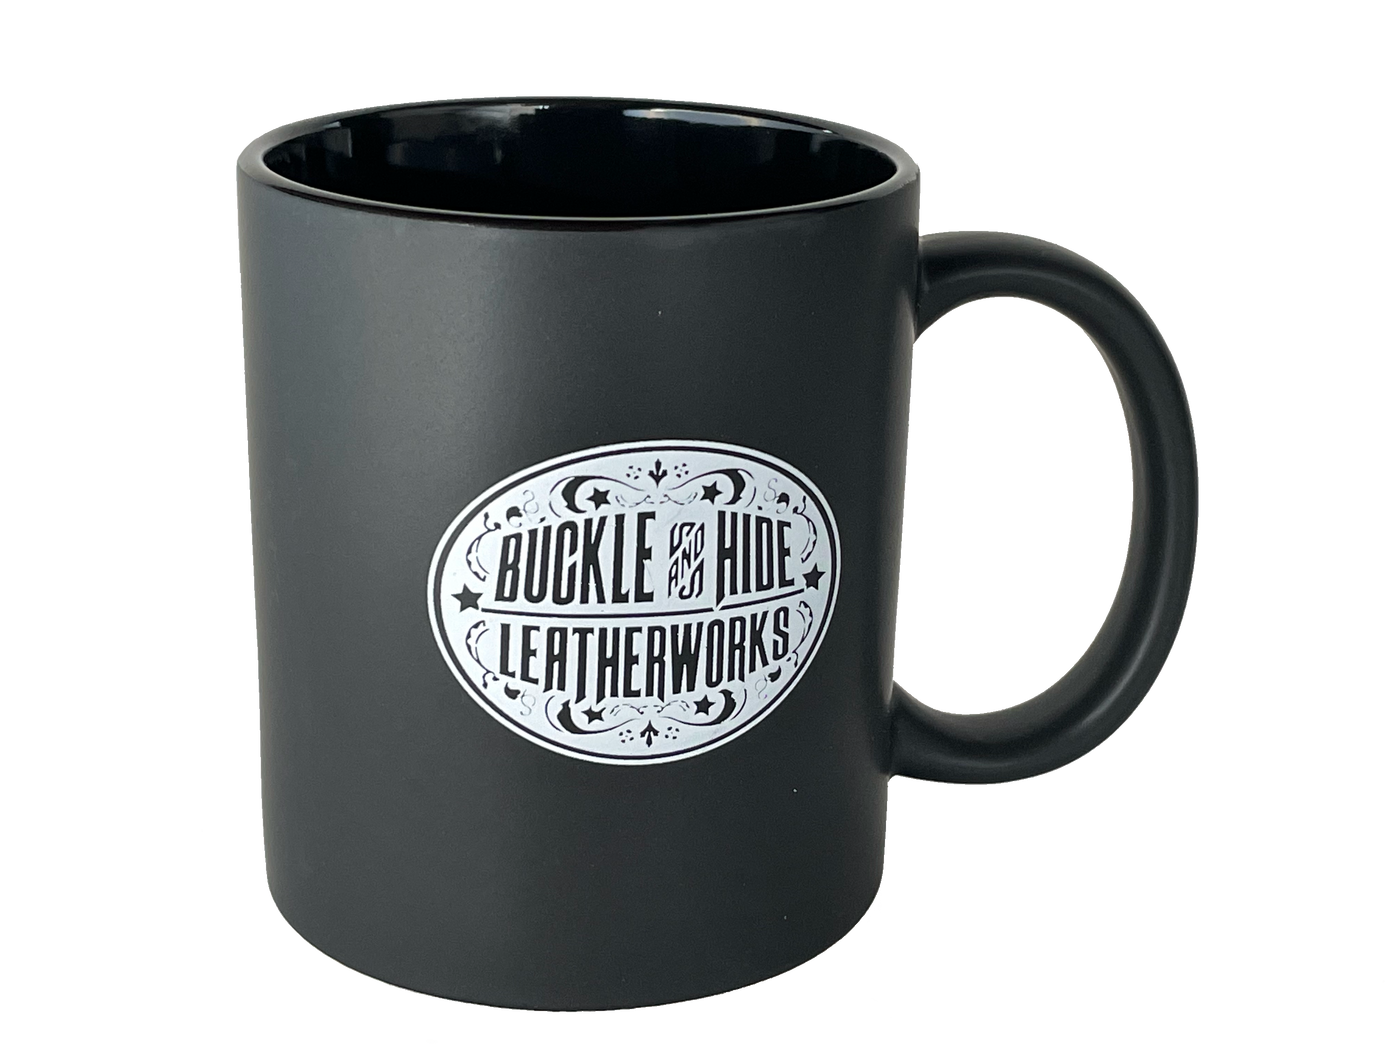 Enjoy your favorite coffee in this Matte Black Buckle and Hide coffee mug! Matte Black ceramic coffee mug with white Buckle and Hide Oval logo.  Available online or in our shop just outside Nashville in Smyrna, TN. 